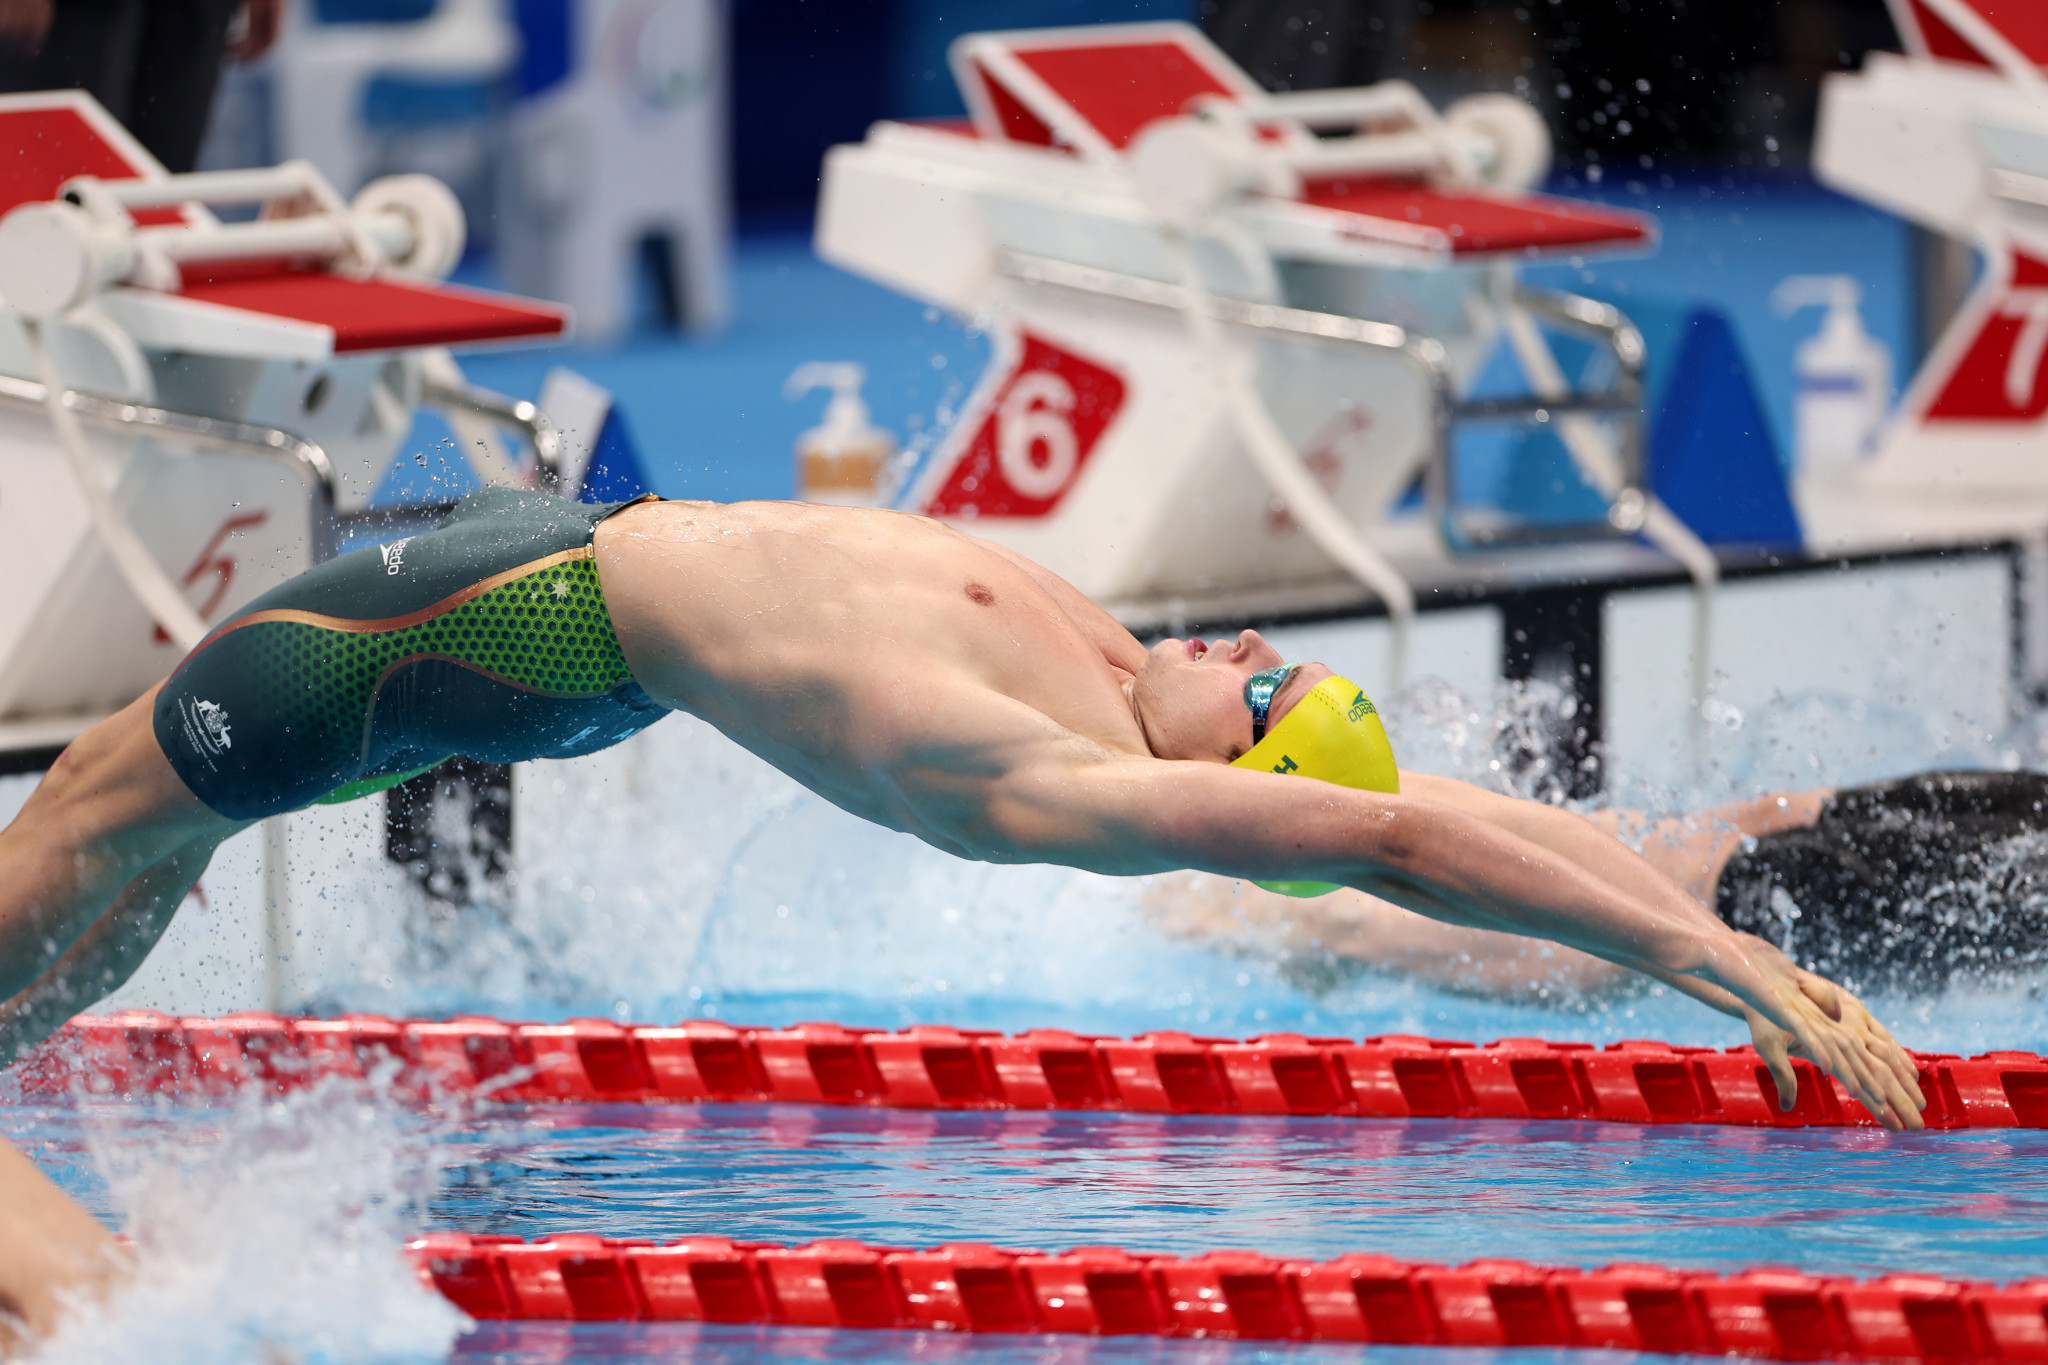 Ben Hance has been selected to represent Australia at the World Para Swimming Championships ©Getty Images